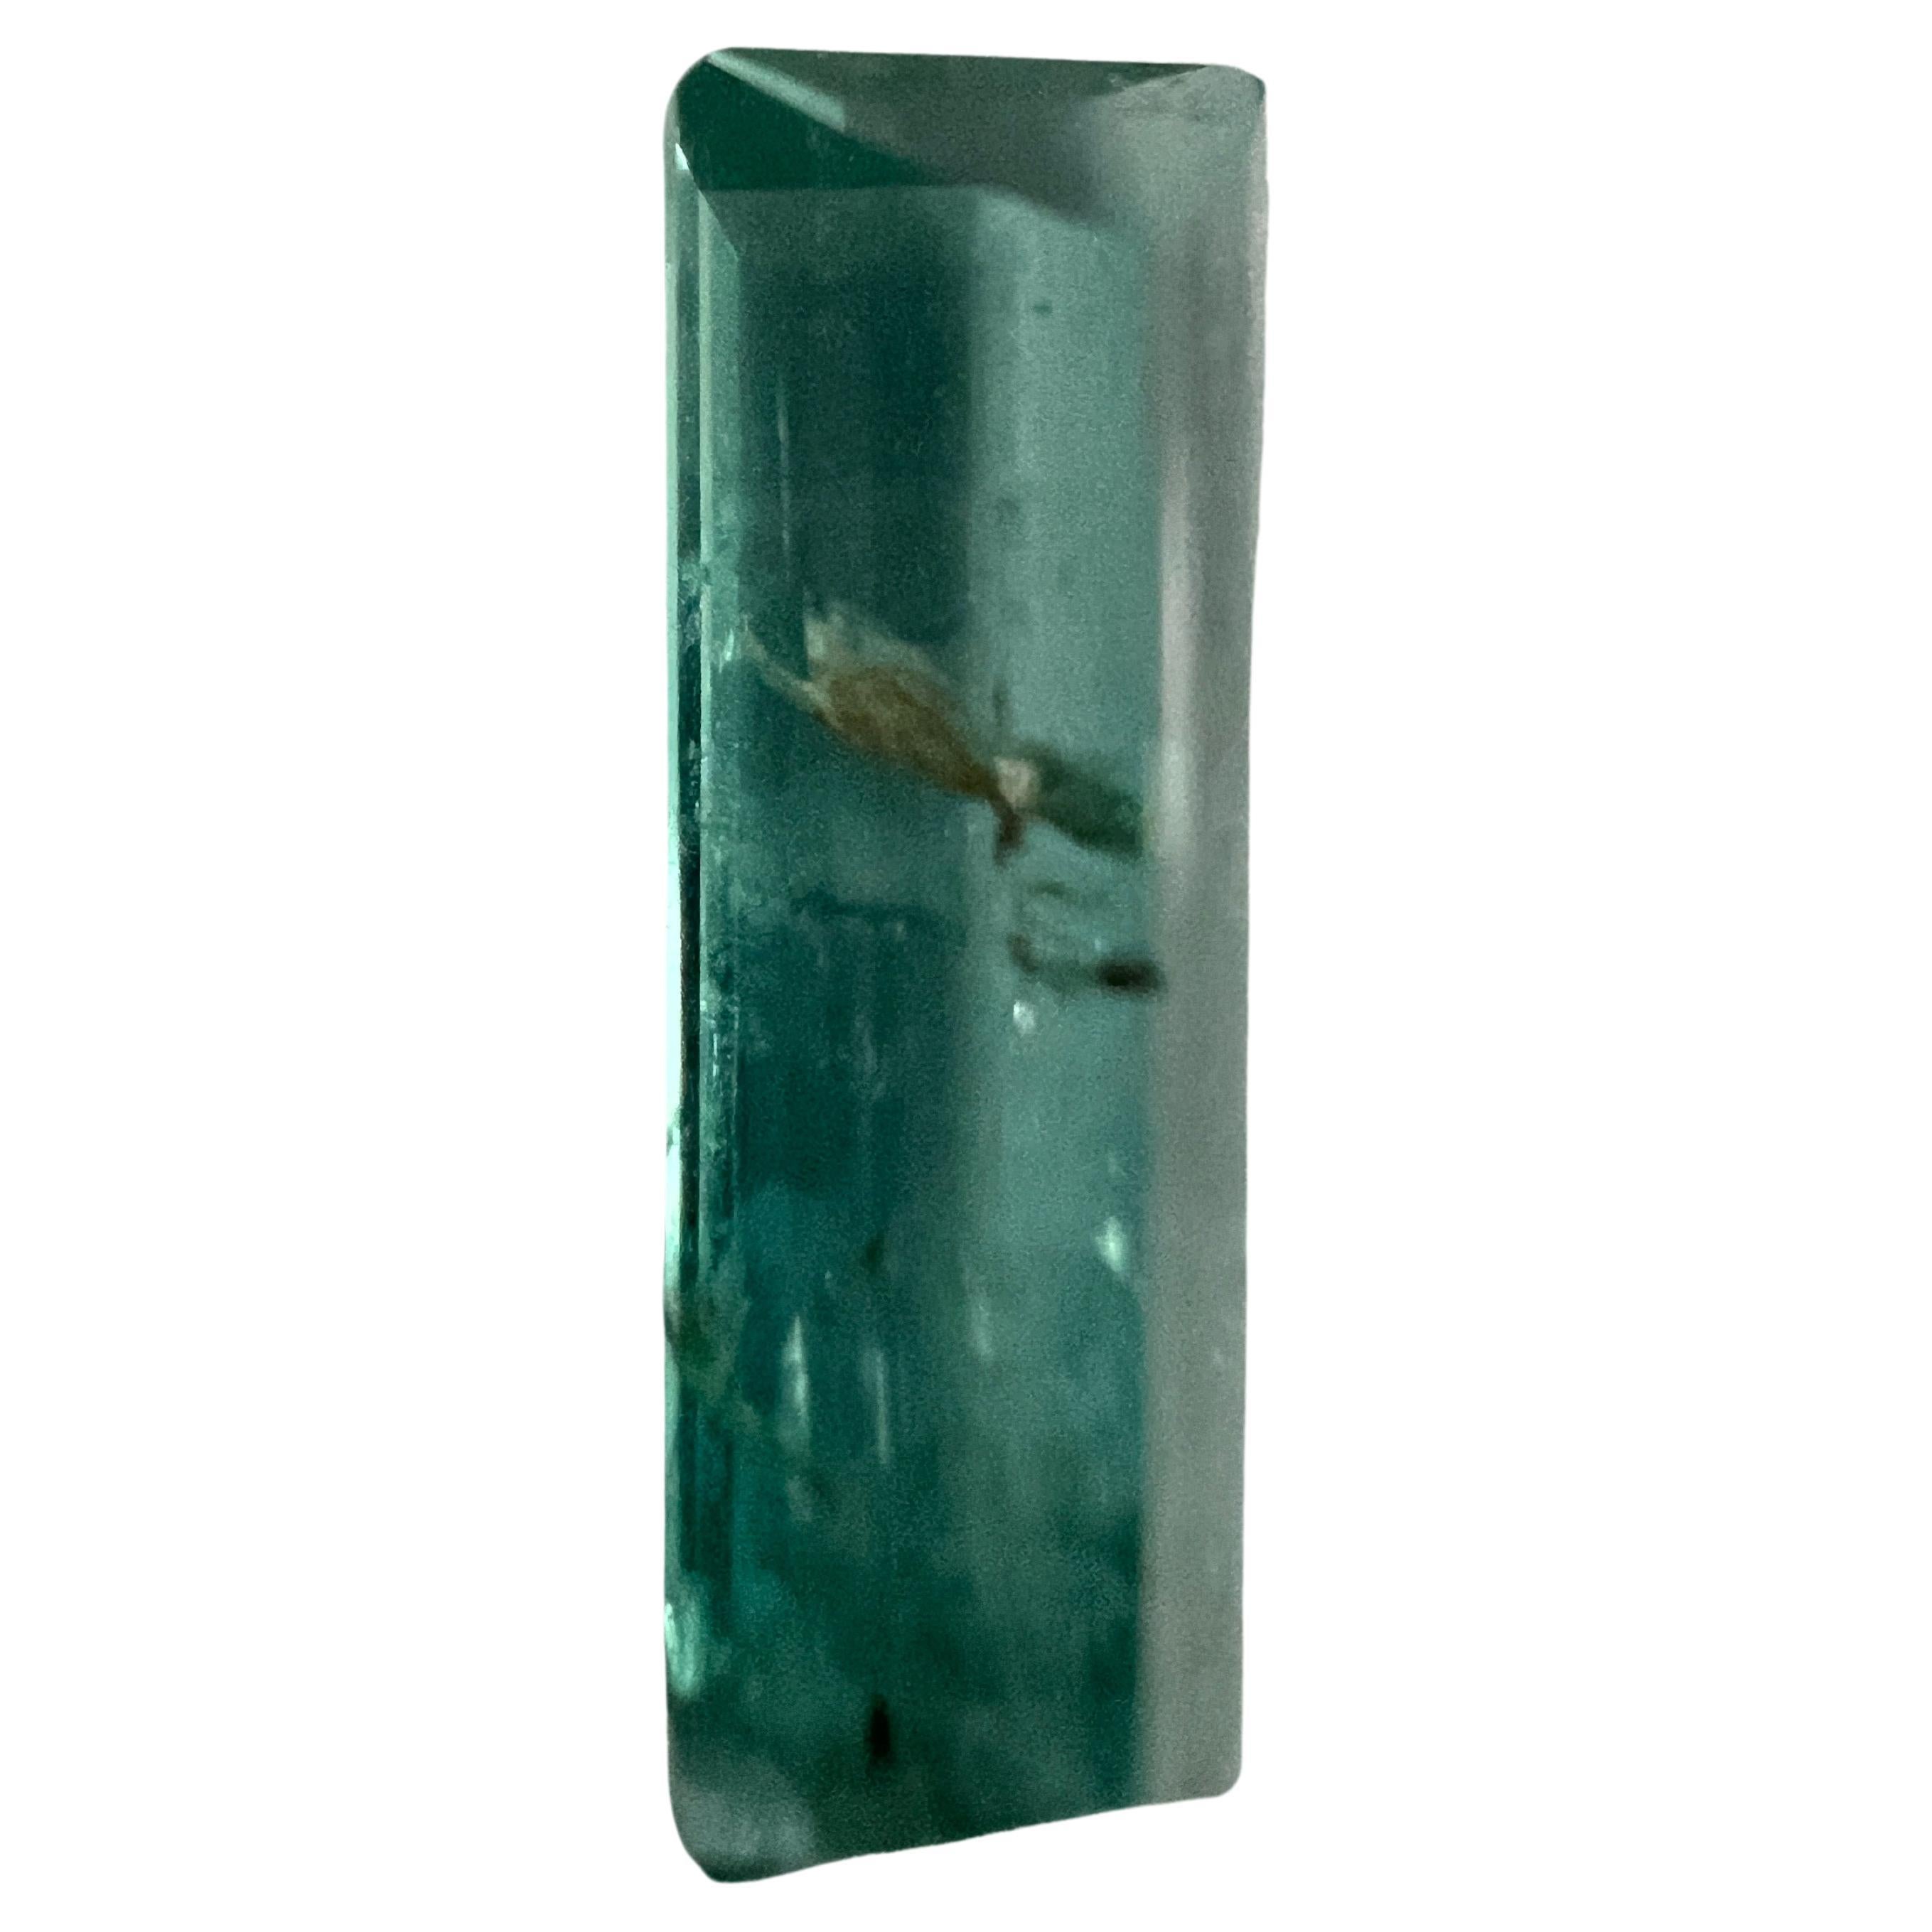 A chance to own 3.65ct Non-oiled Rectangle Cut Natural Emerald Gemstone. This gemstone has a deep, lush green color, reminiscent of the richest foliage. Expertly fashioned in a  rectangle cut, and despite its inclusions, showcases a balance of